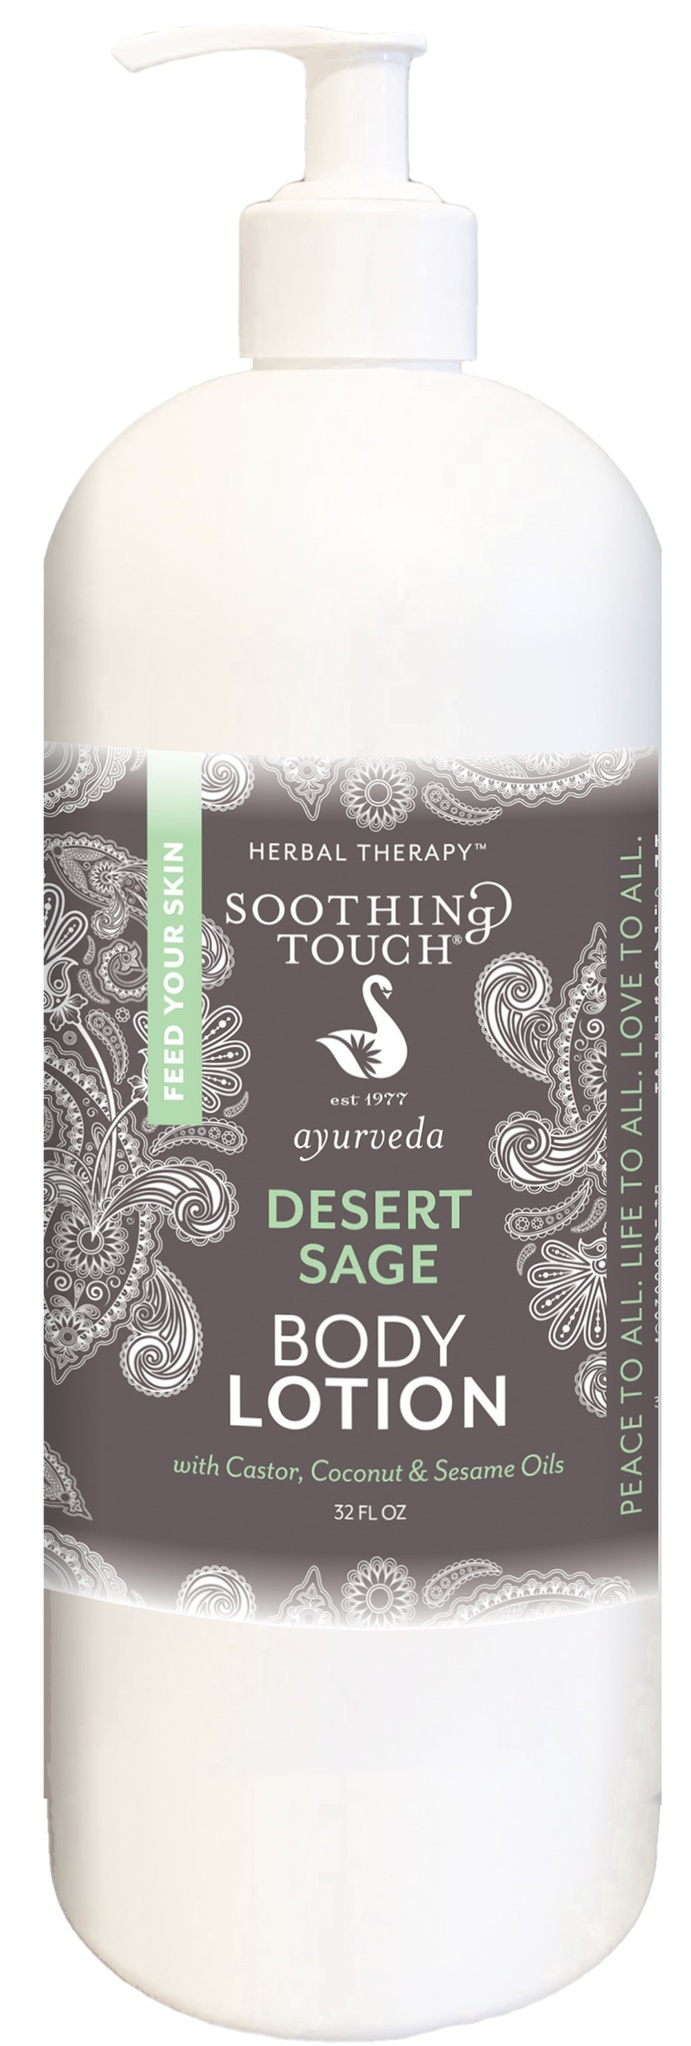 Soothing Touch Desert Sage Body Lotion